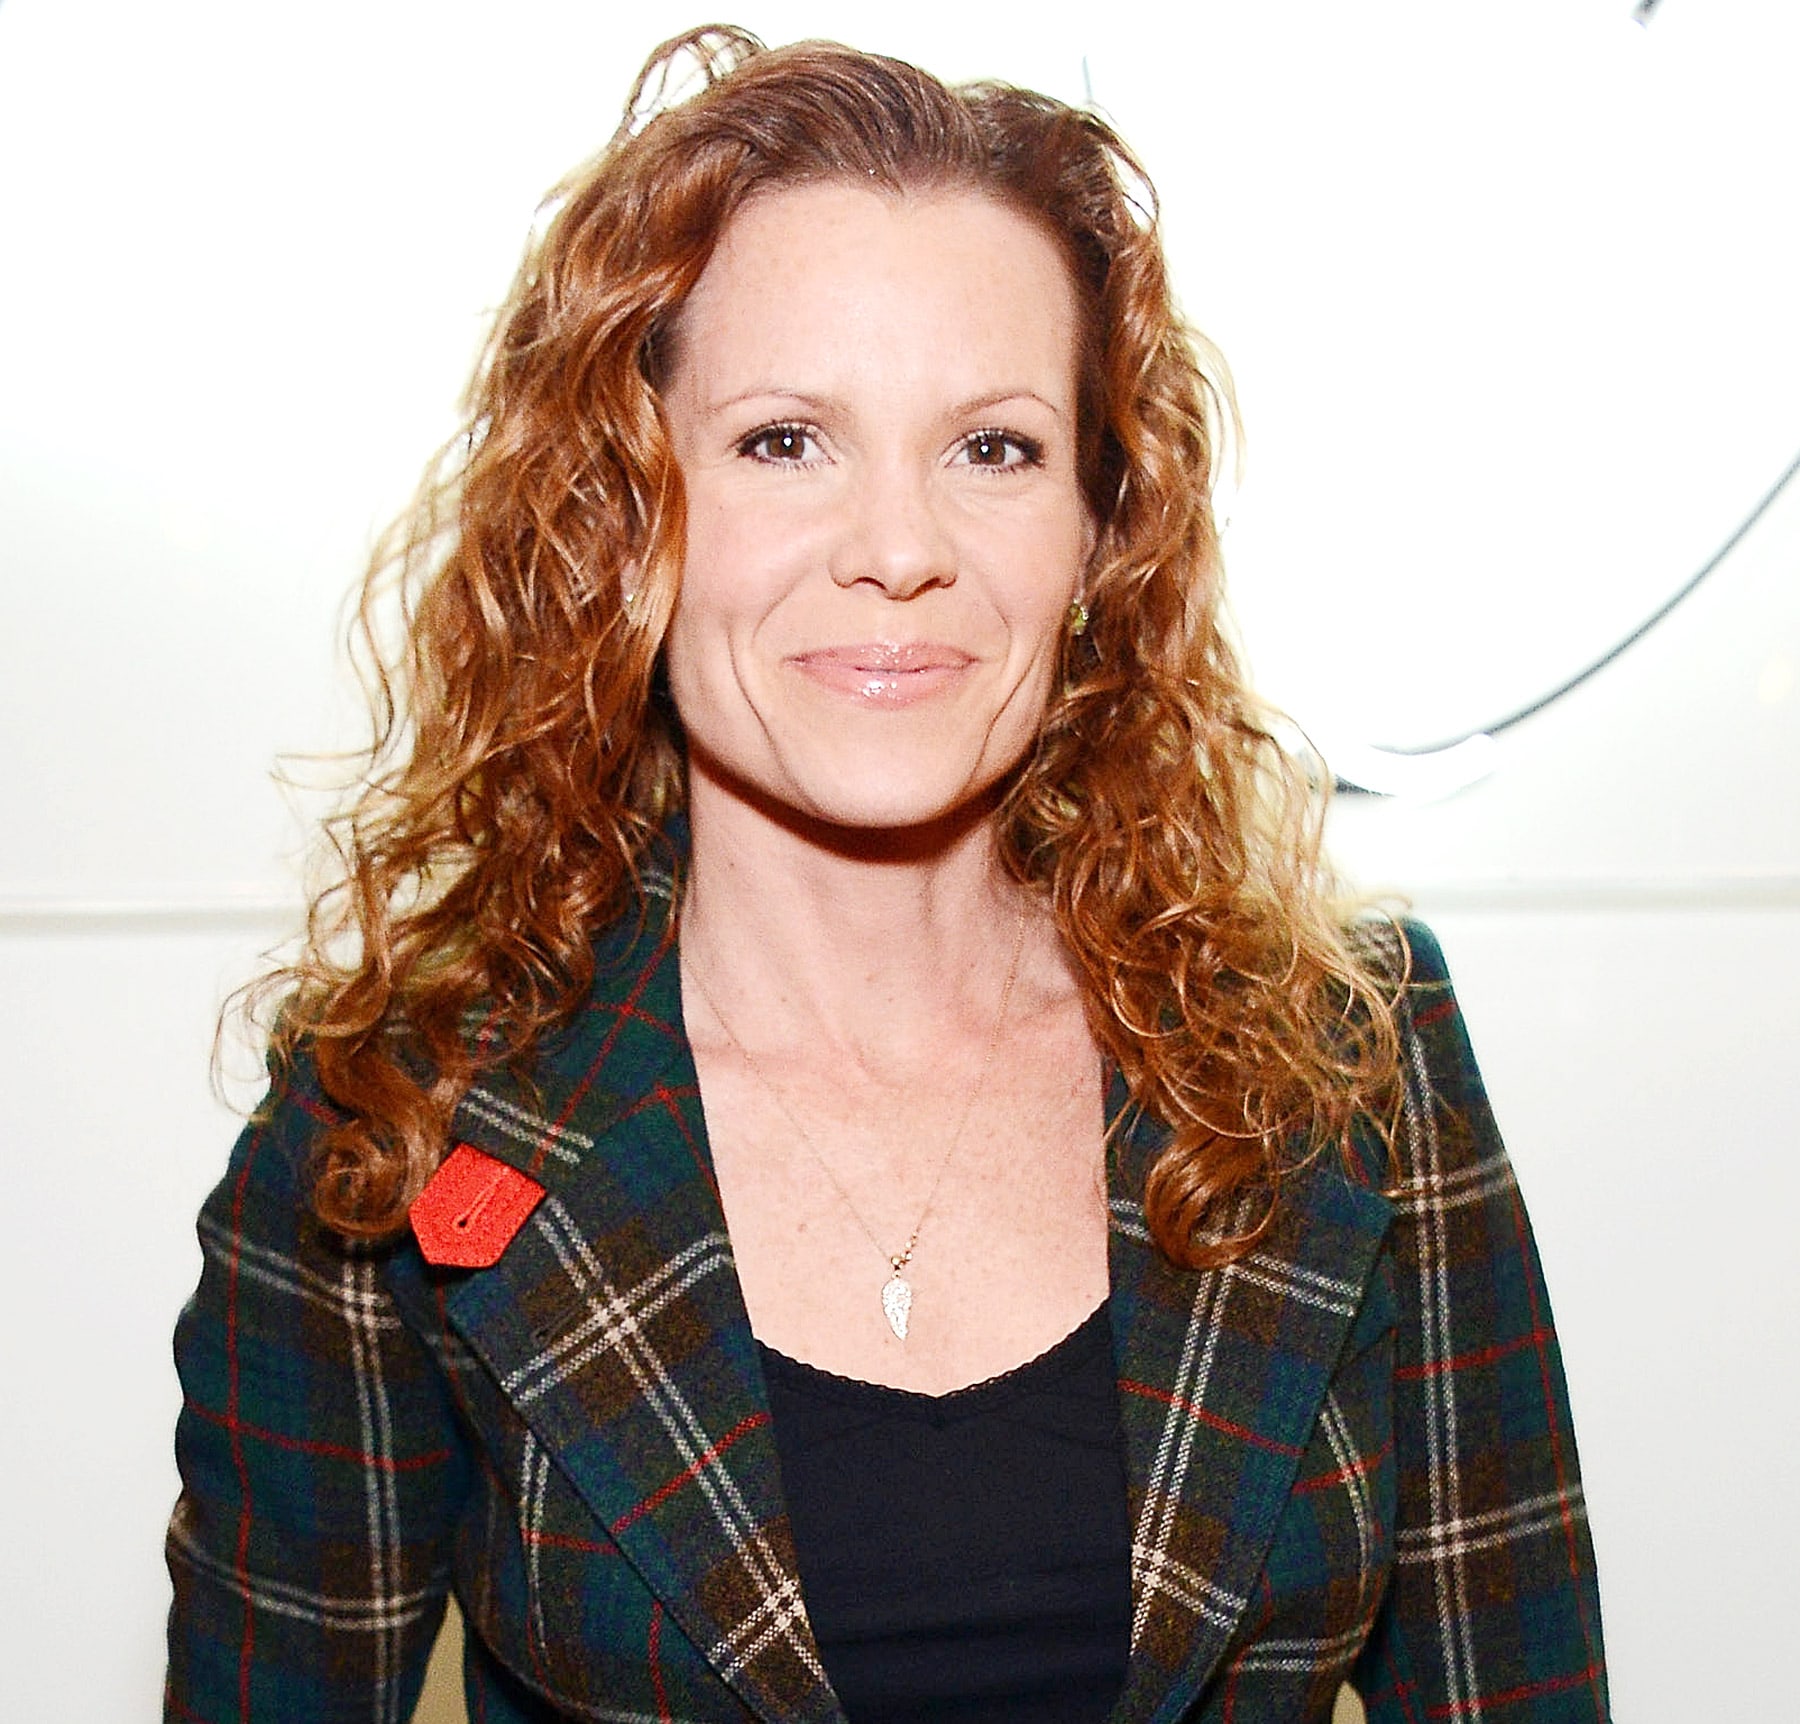 50 Hot Photos Of Robyn Lively - 12thBlog1800 x 1724